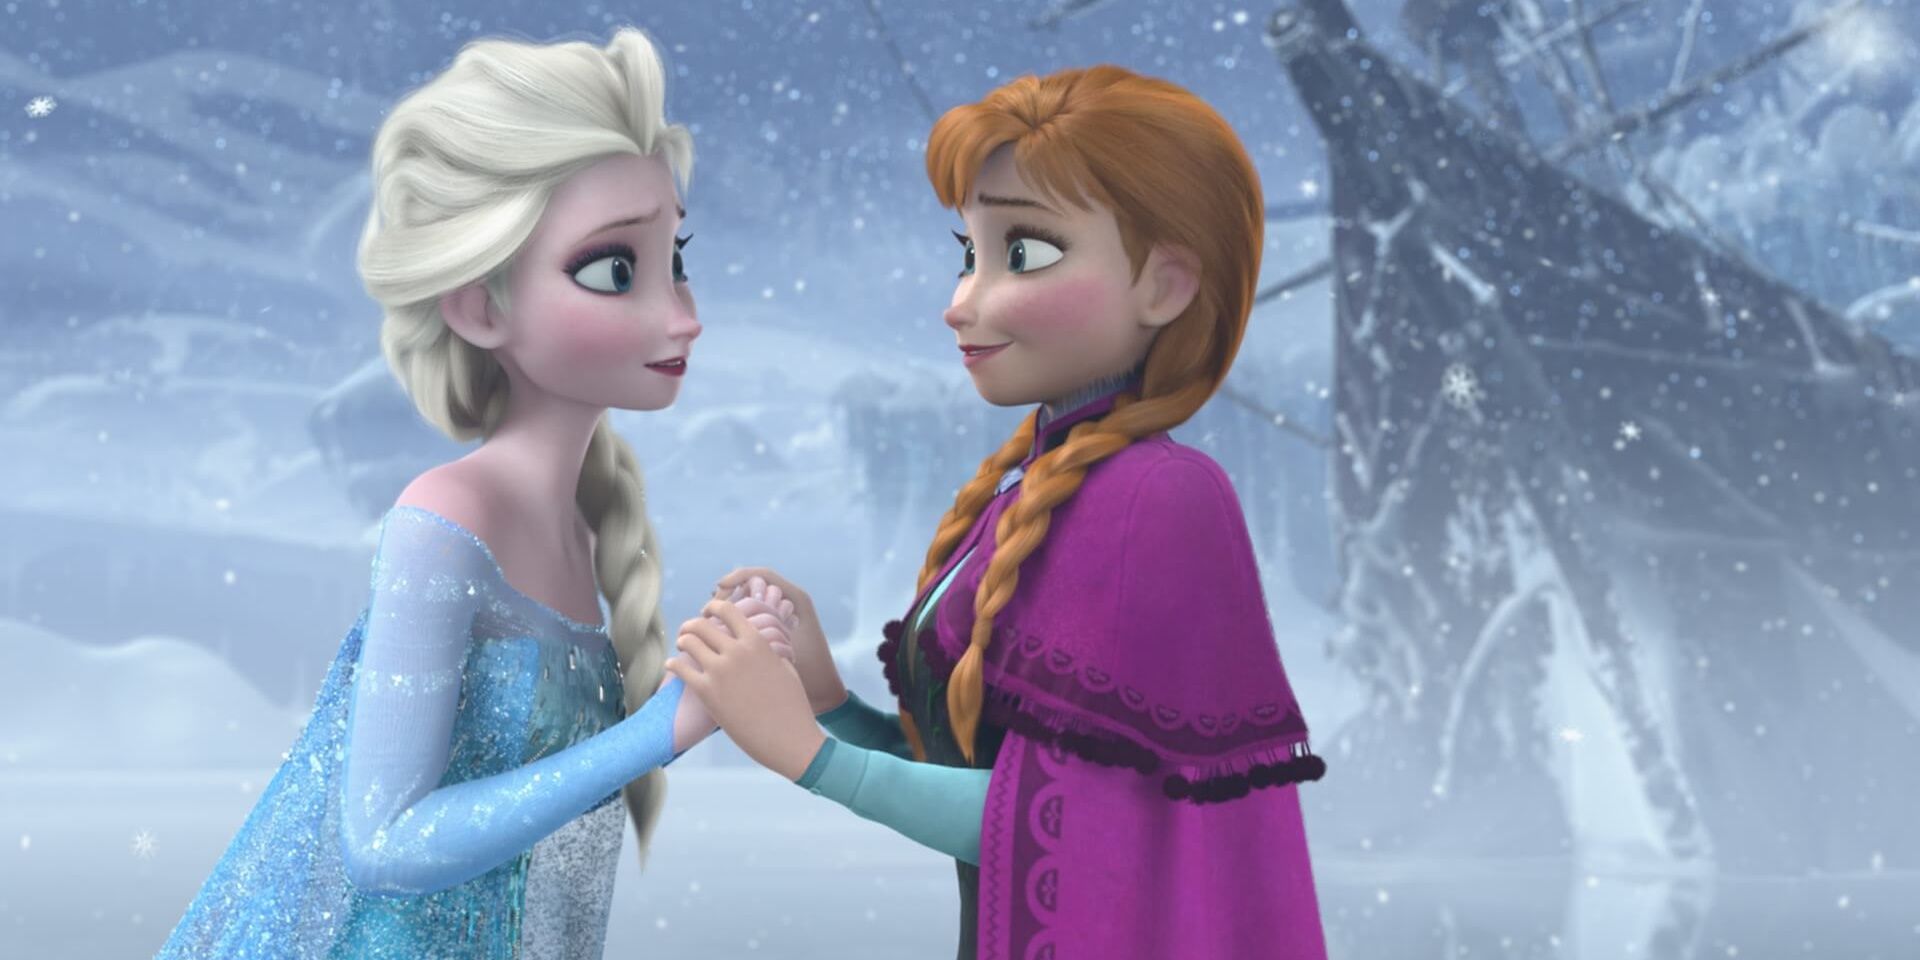 Frozen instal the last version for android